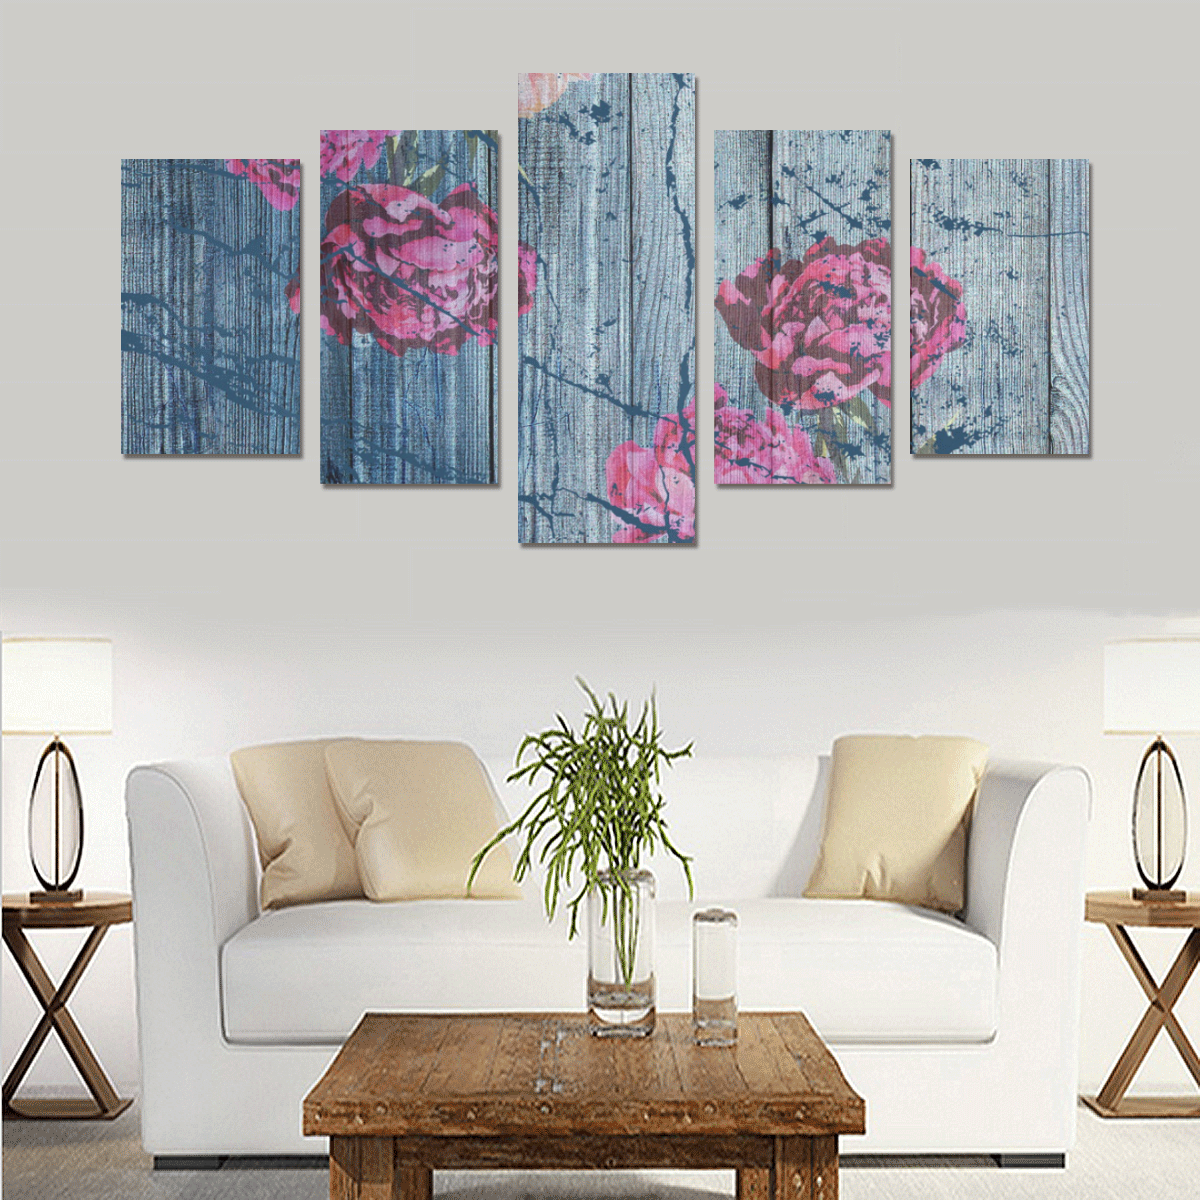 Shabby chic with painted peonies Canvas Print Sets C (No Frame)